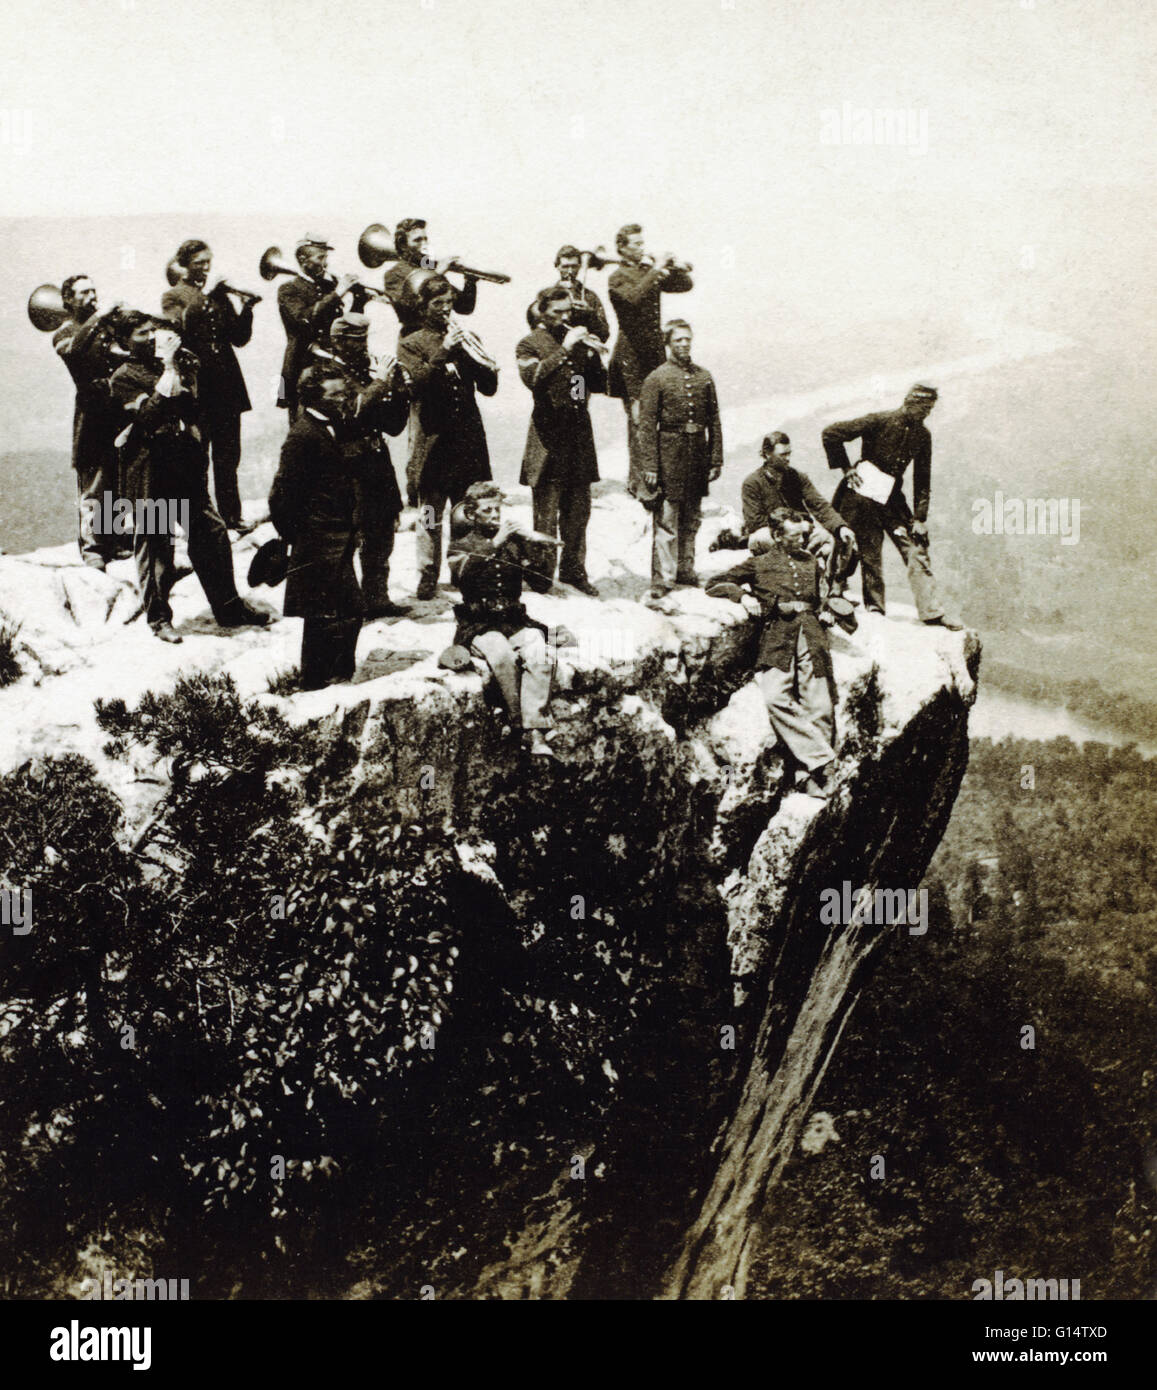 A Union Army brass band posed and playing atop Lookout Point, Tennessee. The Tennessee River is visible in the background. 1864. Photographed by Robert Linn. Wisconsin Historical Society/Photo Researchers, Inc. Stock Photo